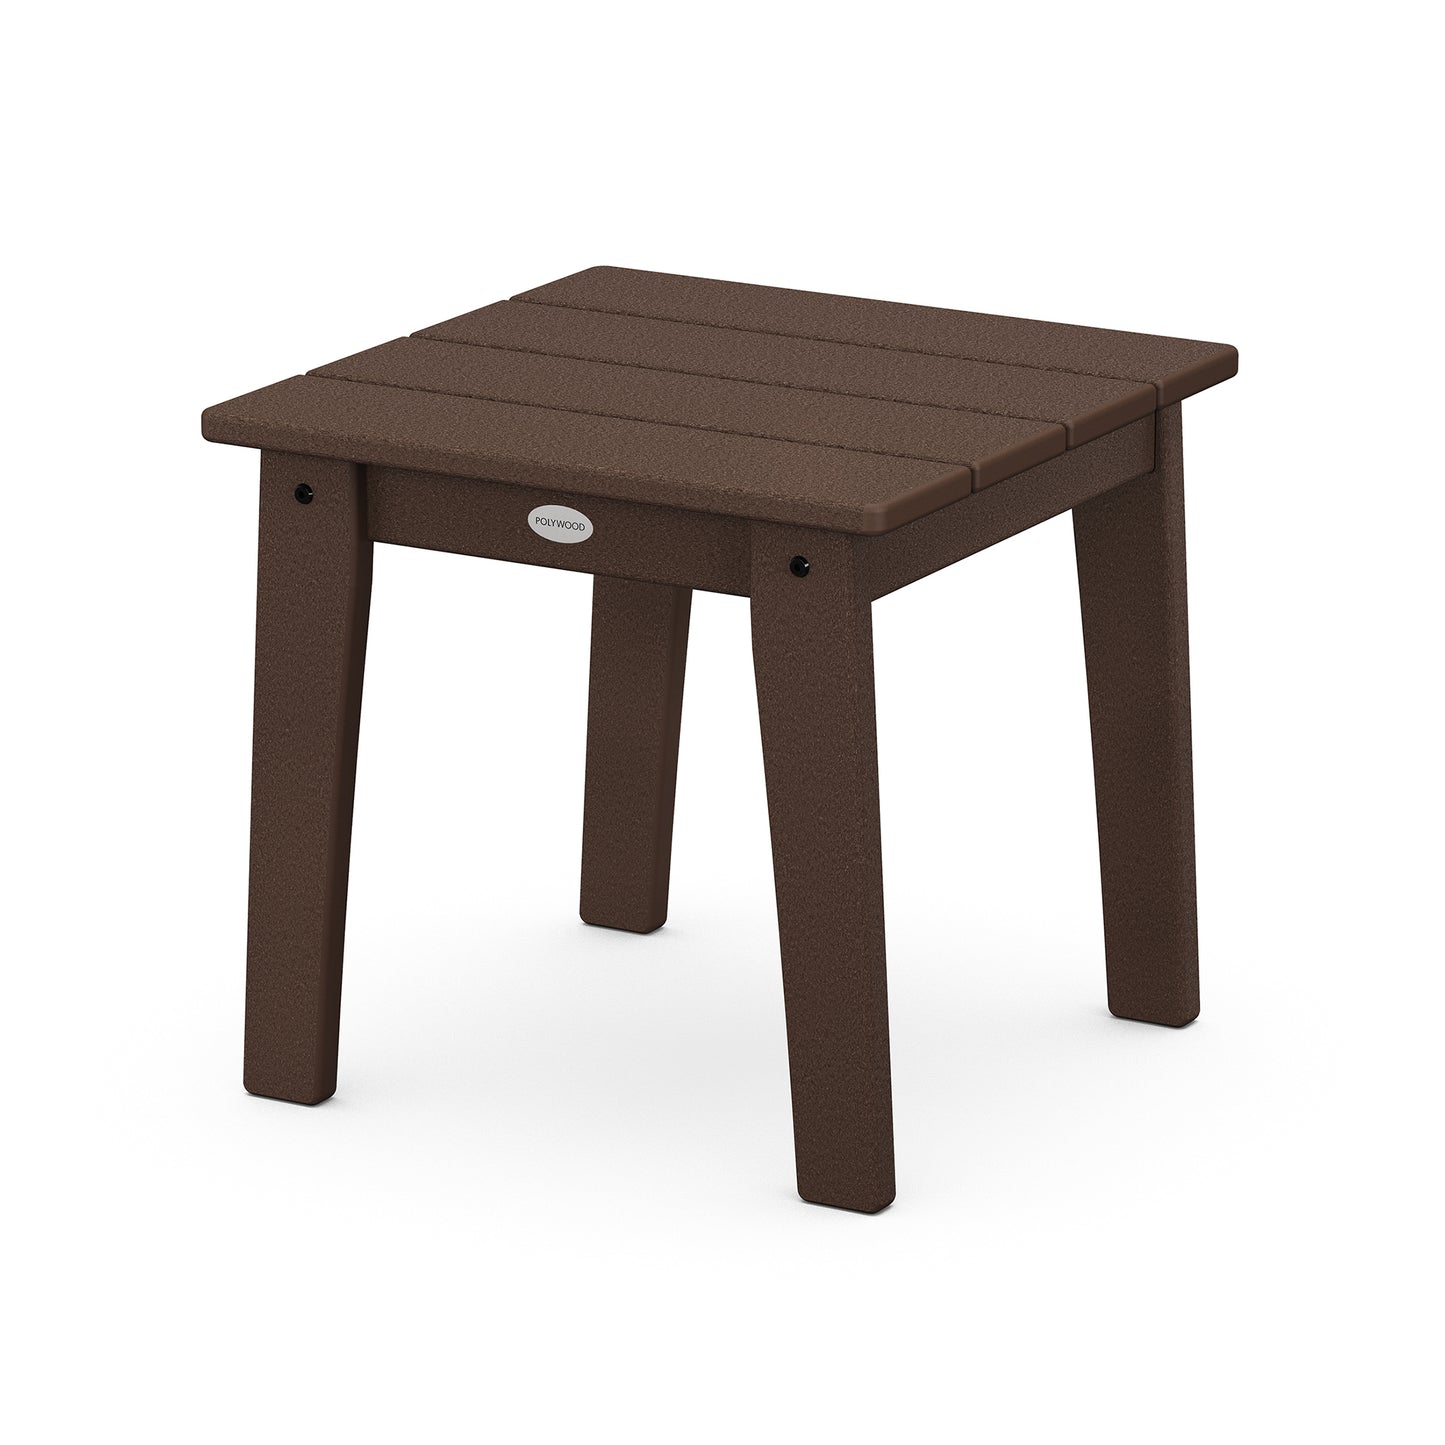 A small, sturdy brown POLYWOOD® Lakeside 18" End Table with a textured top and four legs, pictured against a plain white background. The table has a simple, functional design.